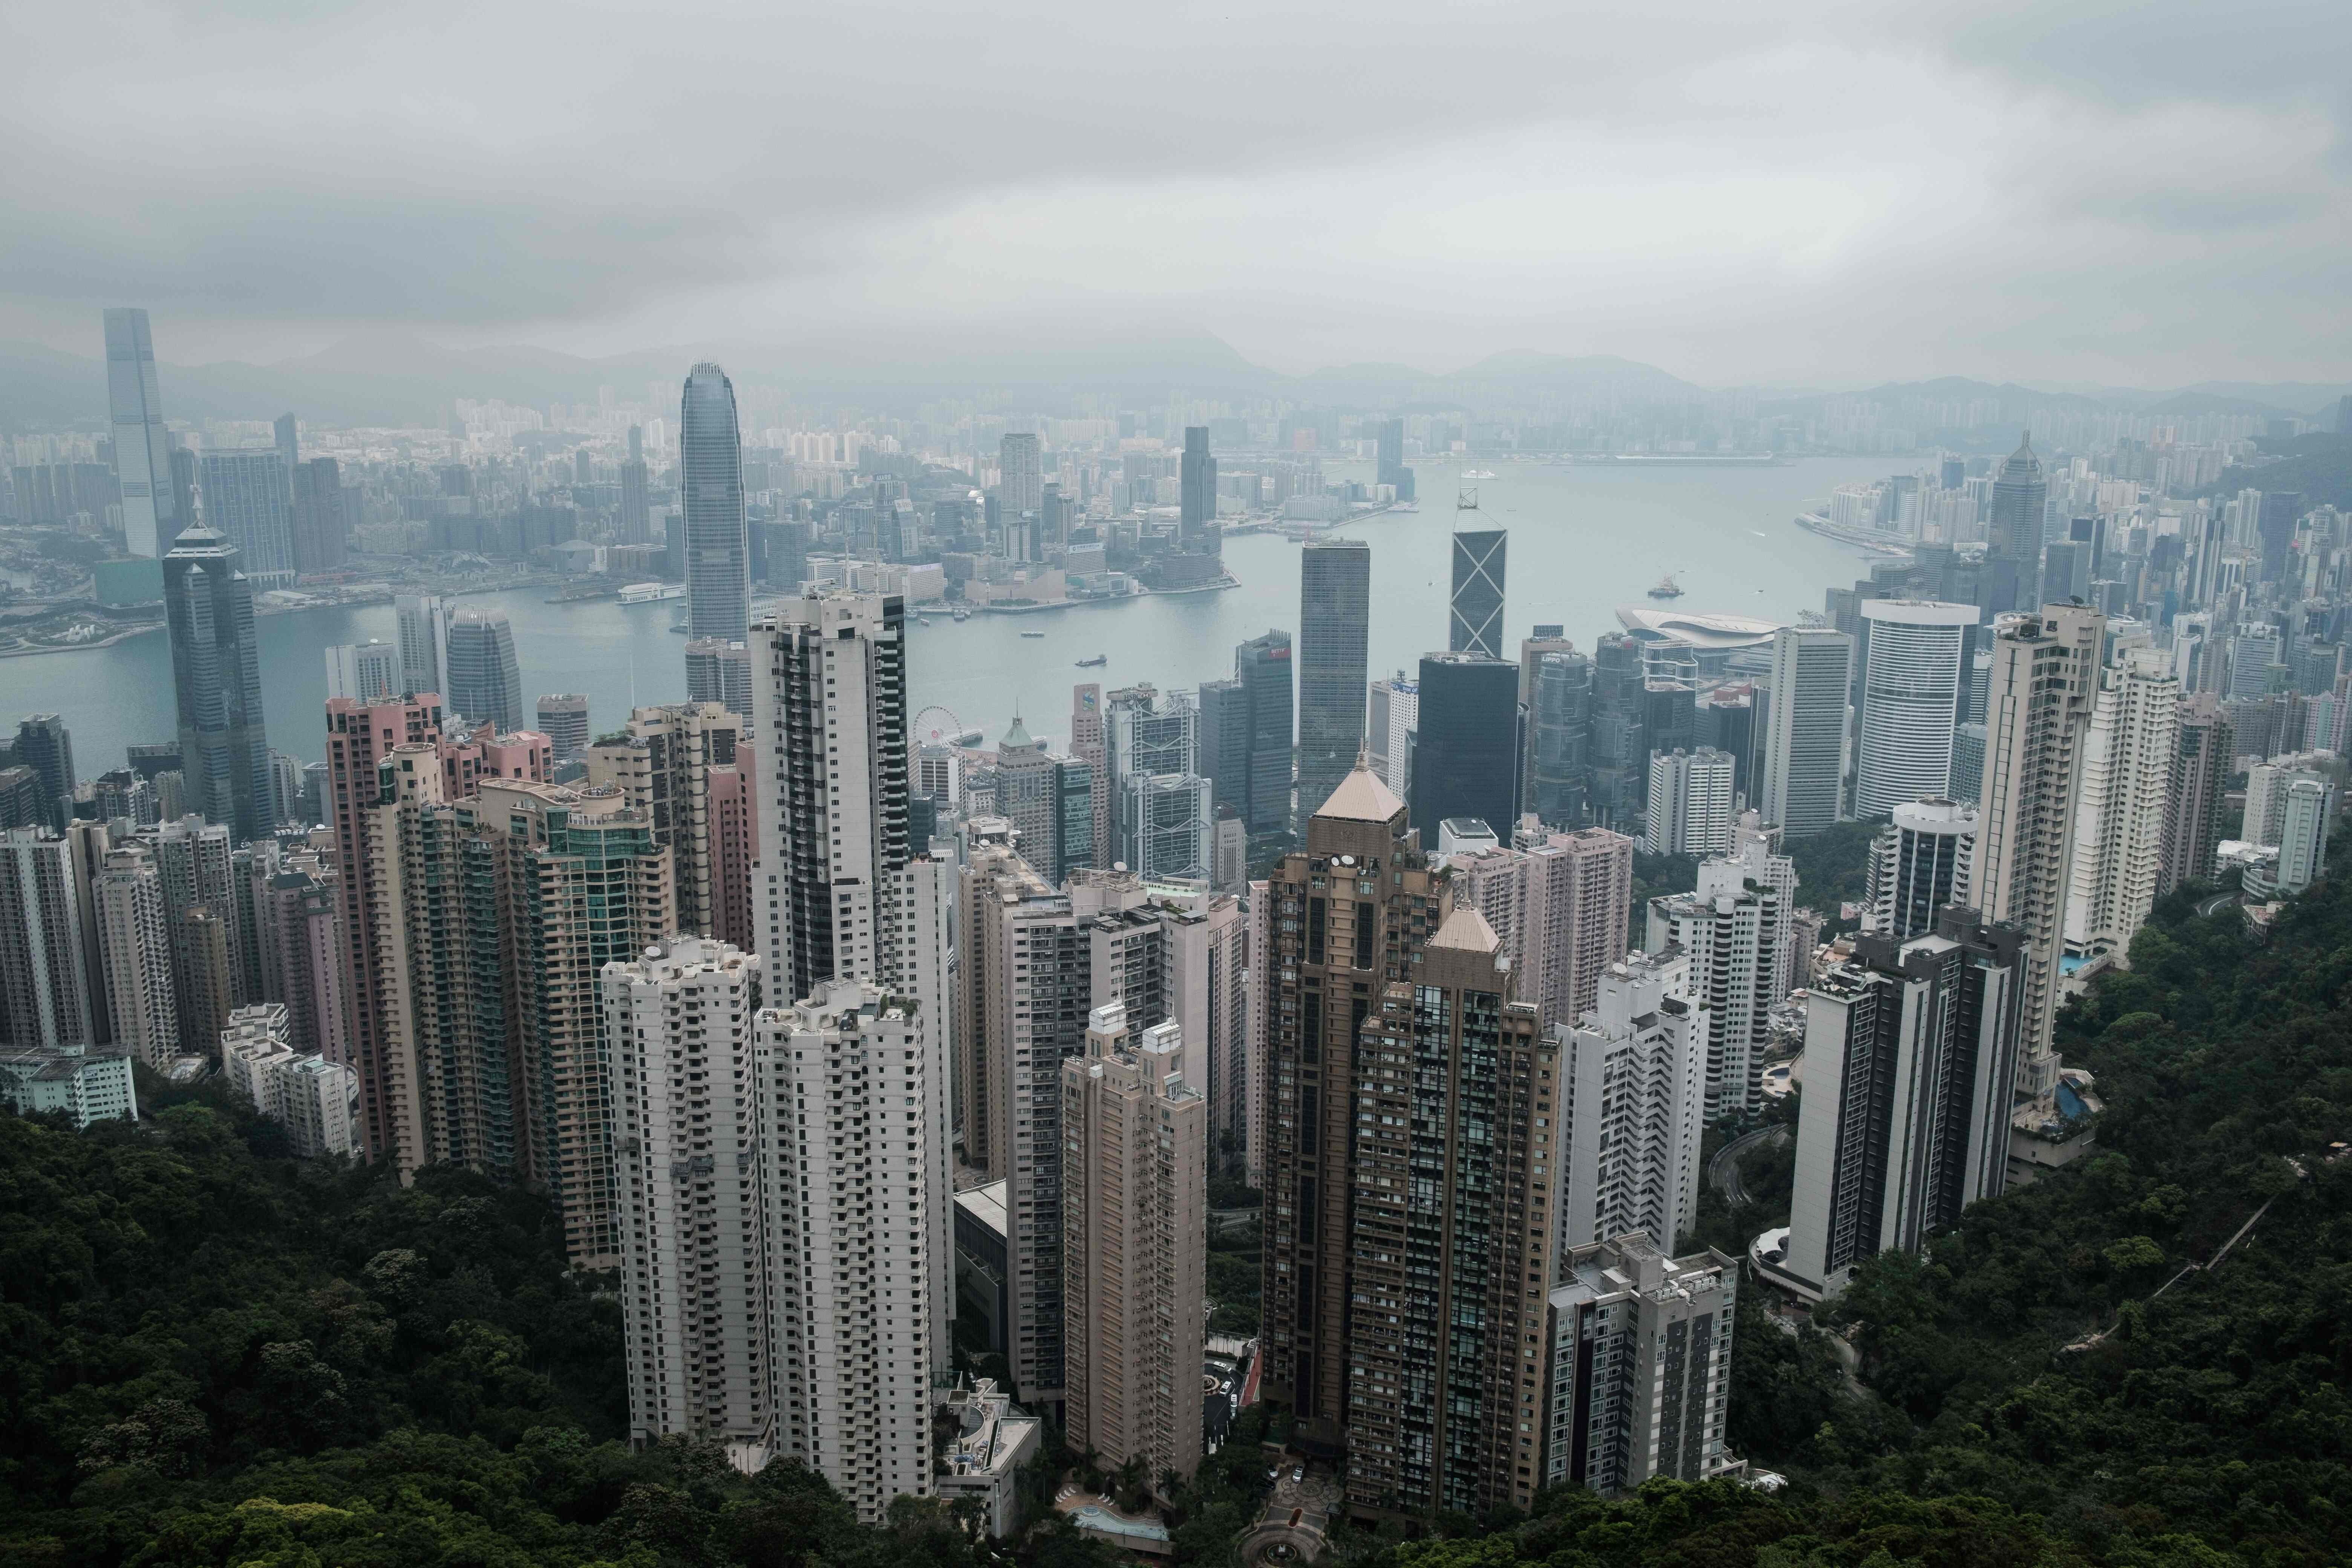 Ethnic minority groups can encounter issues such as workplace exclusion in Hong Kong. Photo: AFP